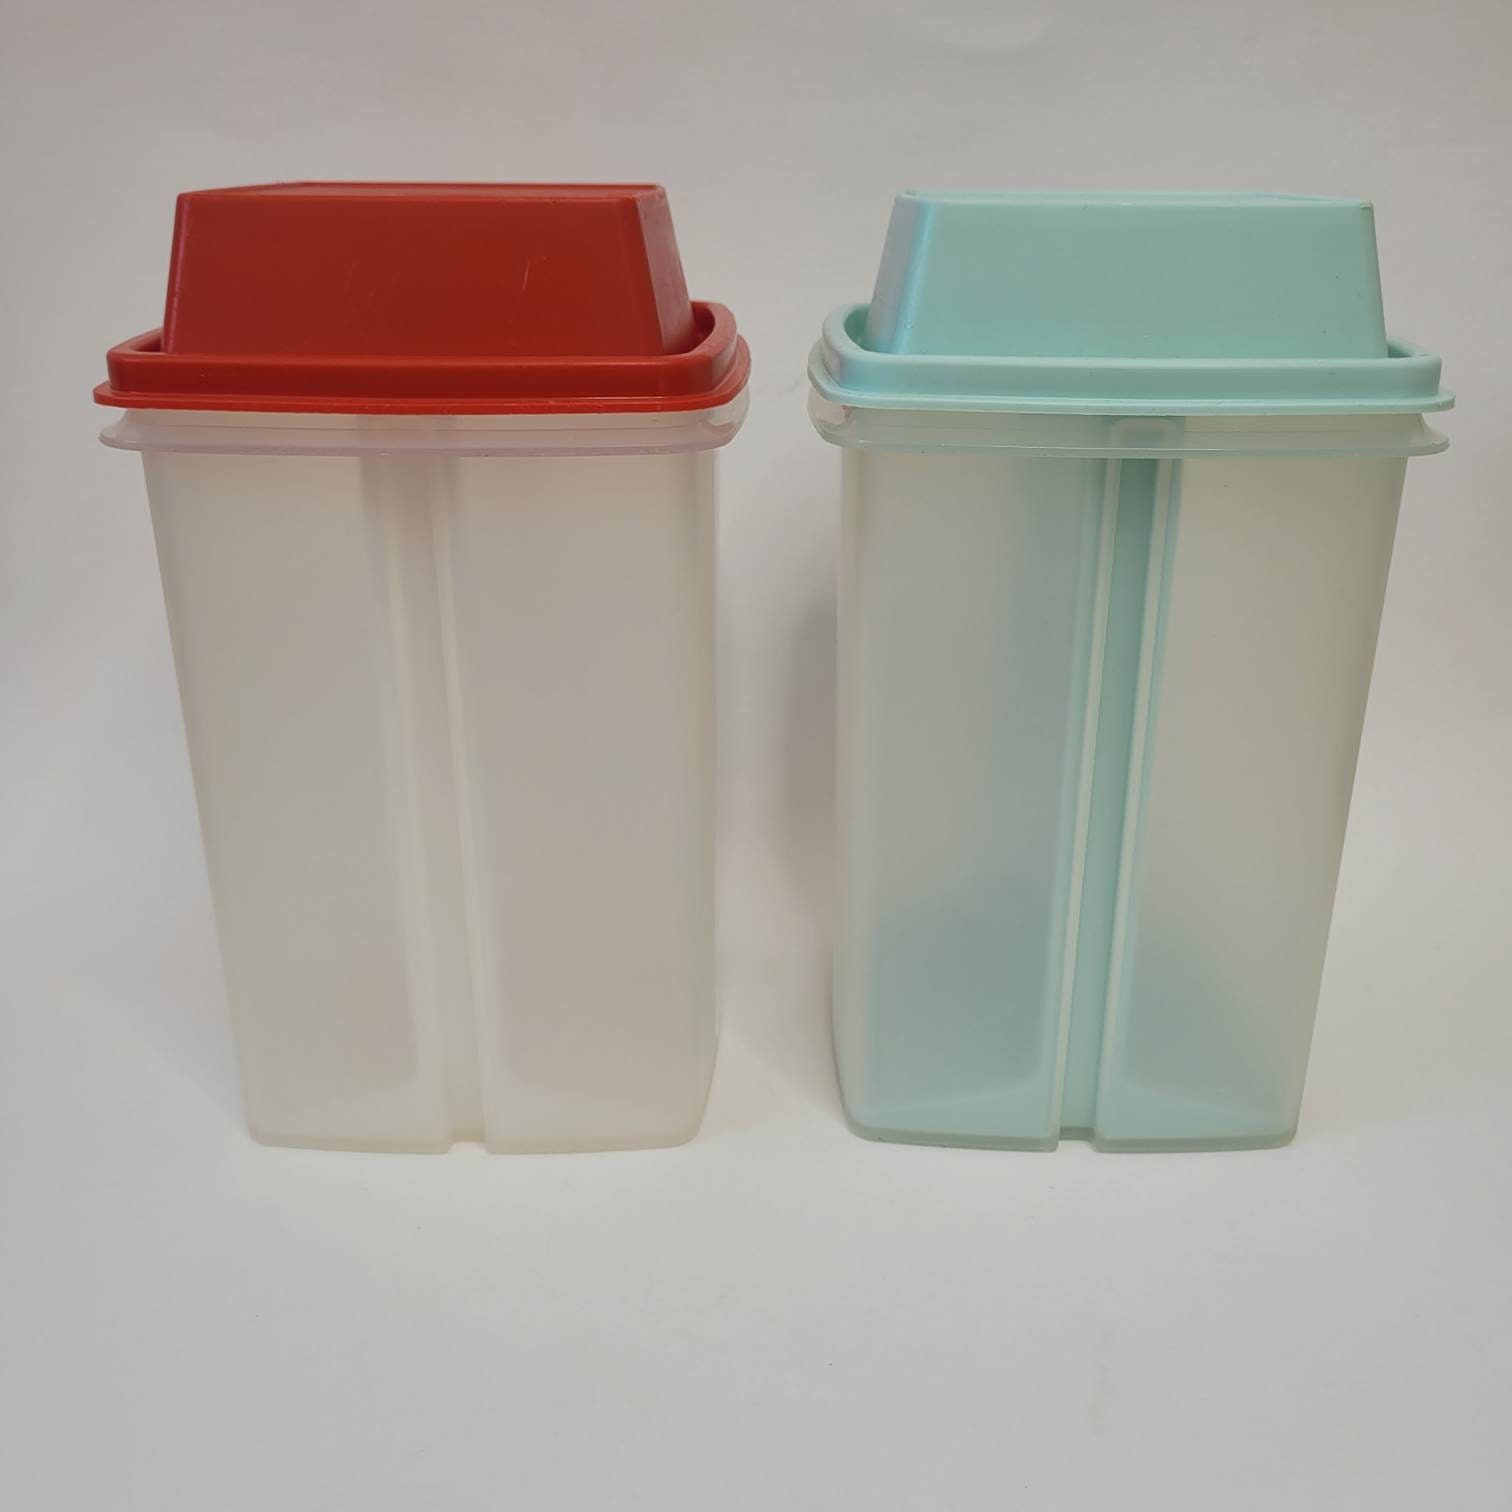 Vtg Tupperware 839-5 Aqua Turquoise Starburst Replacement Lid Servalier  7.5 for Sale in Clermont, FL - OfferUp